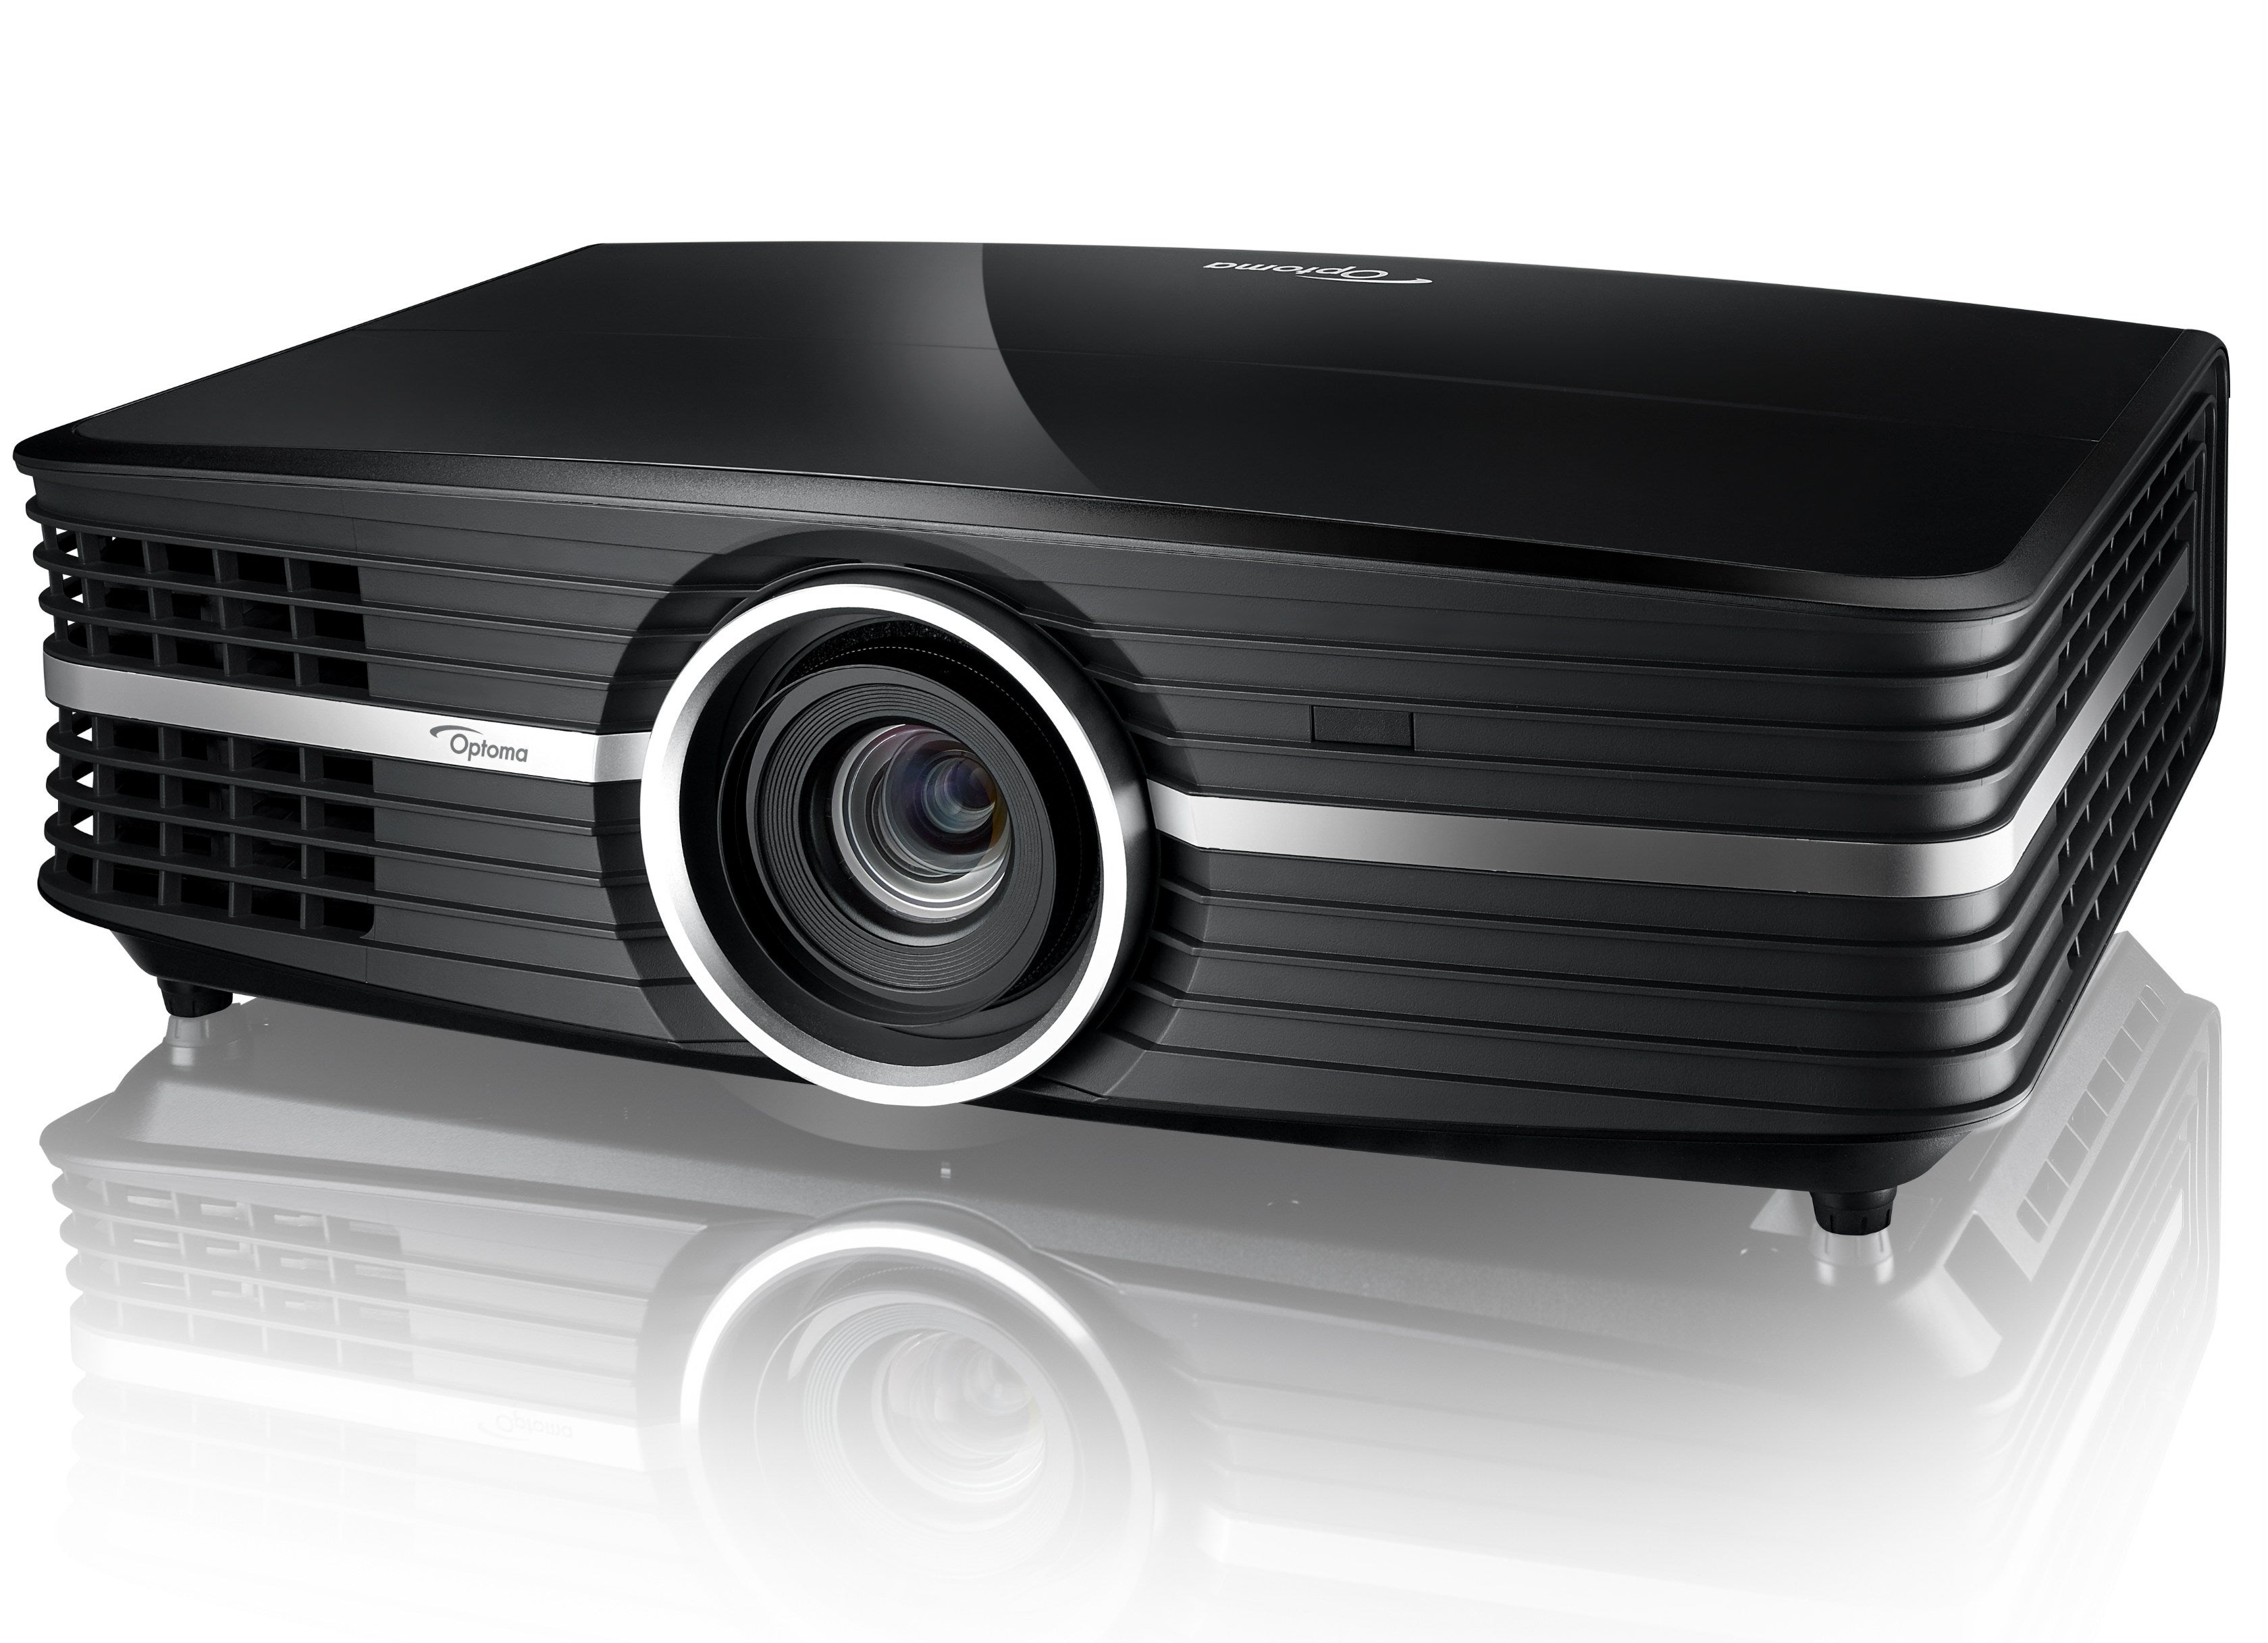 Optoma UHD65 4K projector on a reflective surface.